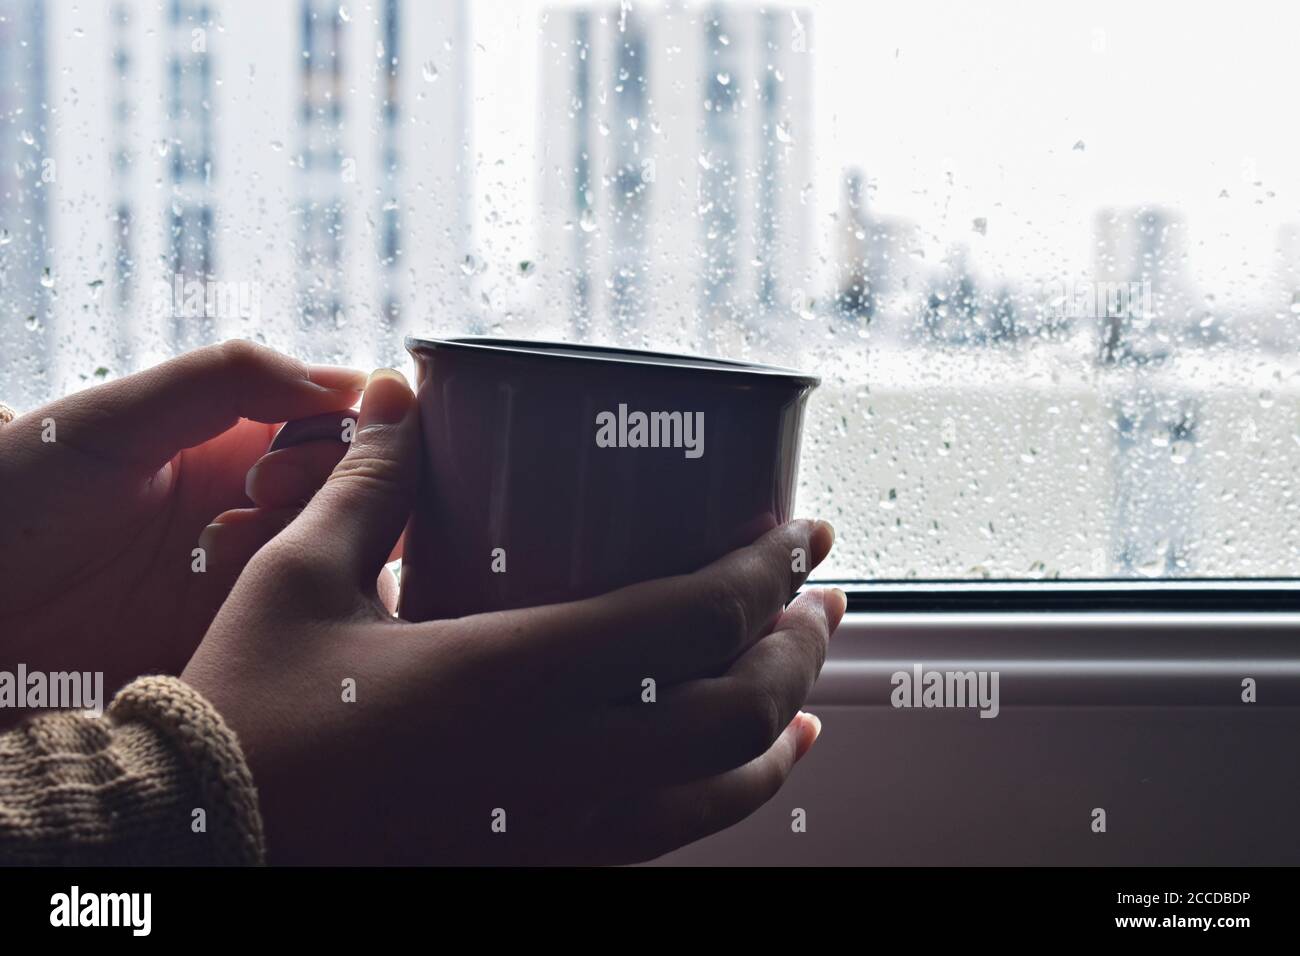 Rainy Window Hand High Resolution Stock Photography And Images Alamy